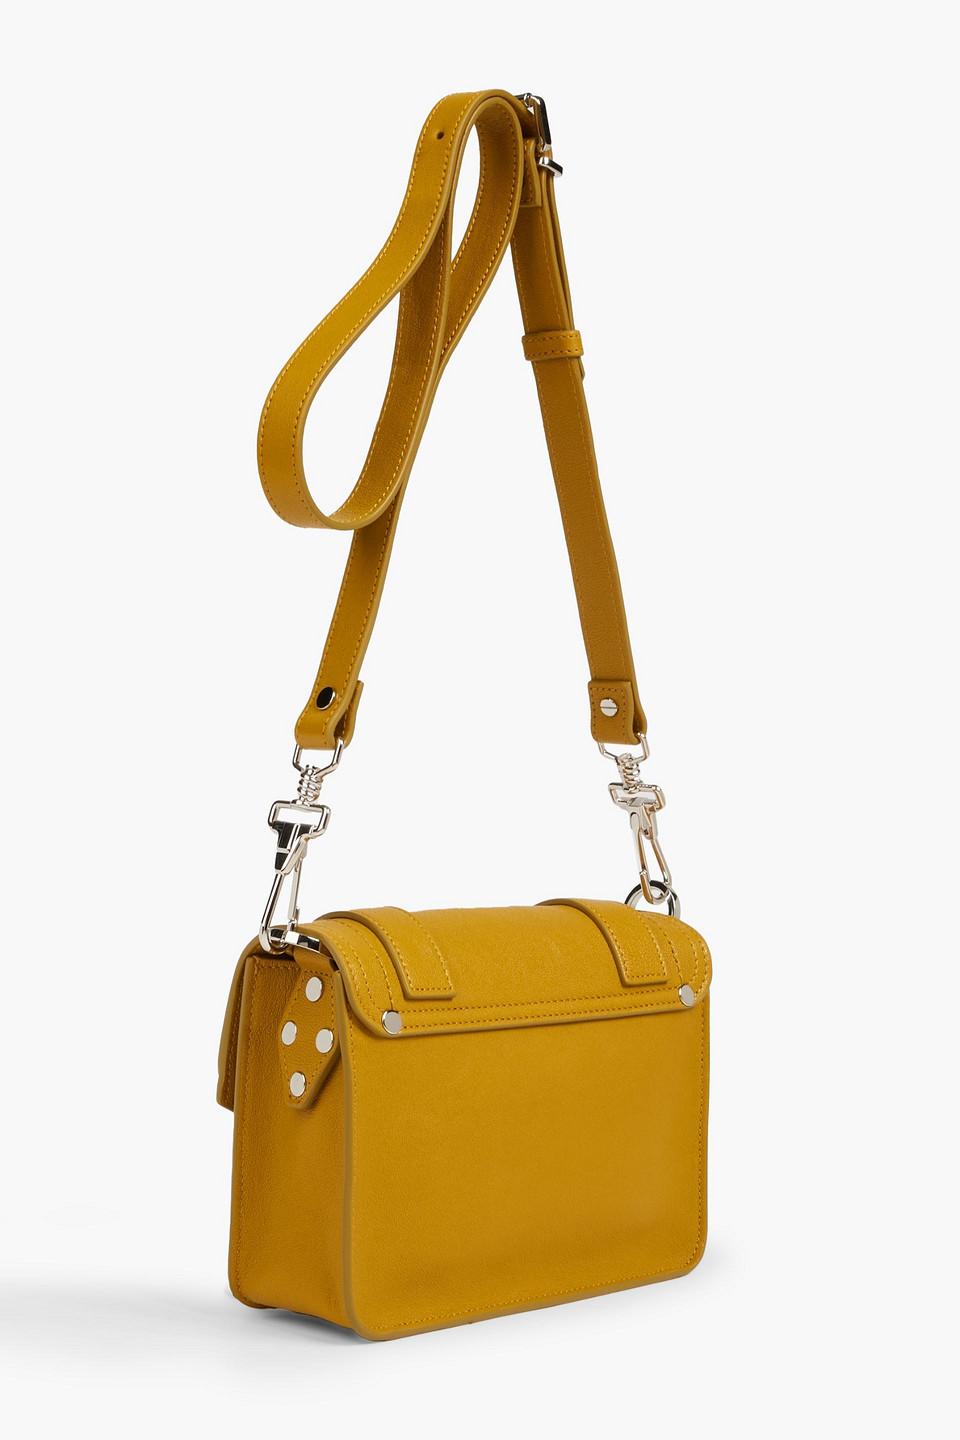 Proenza Schouler Outlet: Ps1 Tiny bag in leather - Yellow Cream